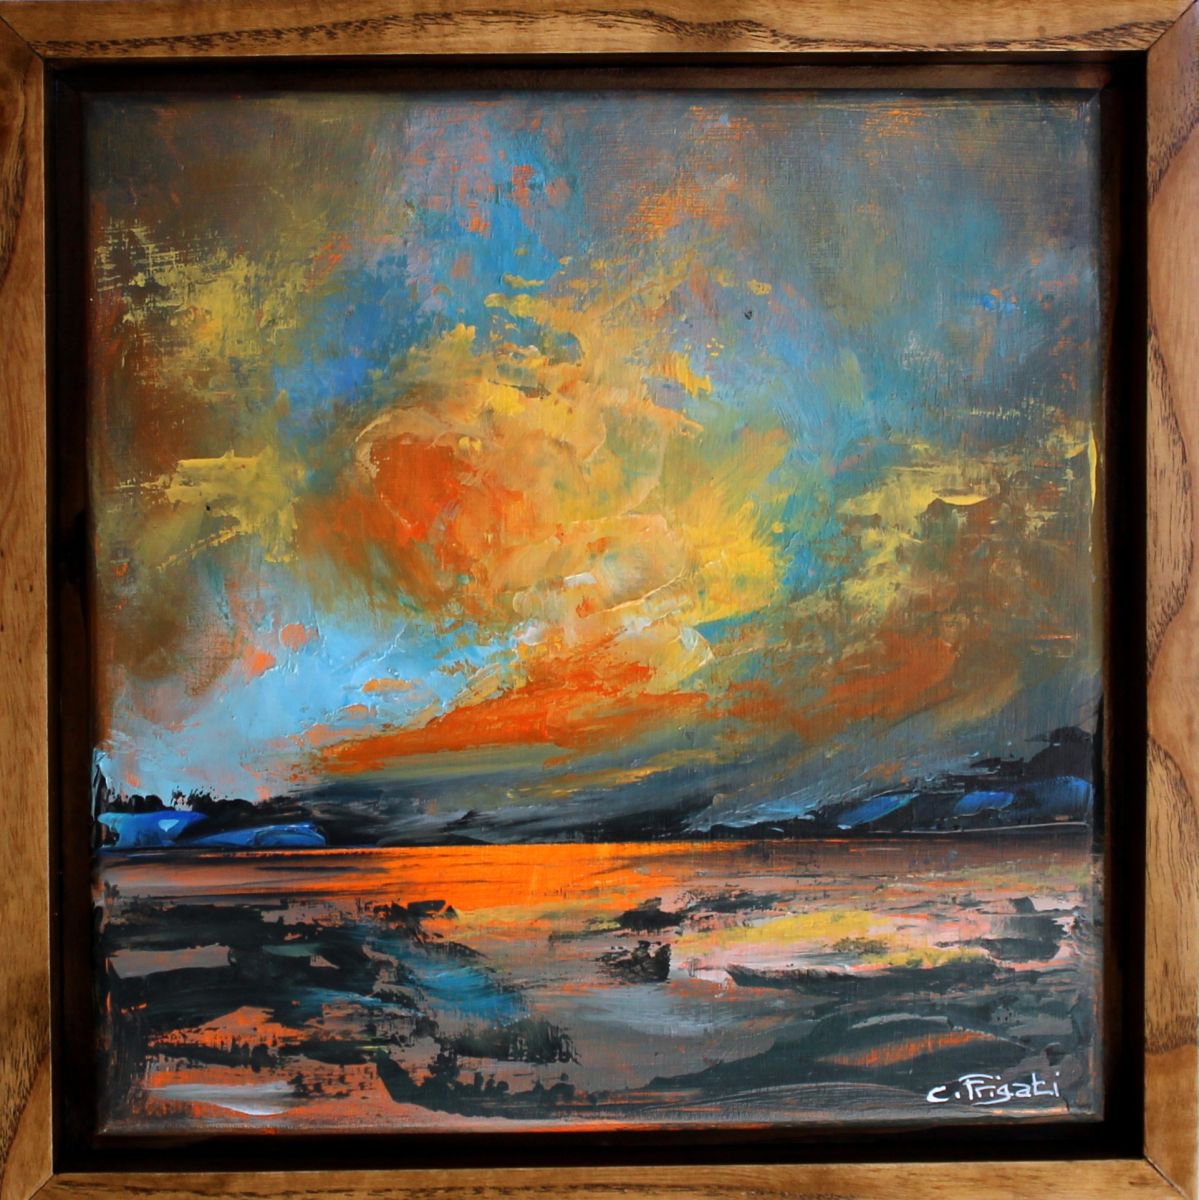 Here it is... - framed abstract landscape by Cecilia Frigati